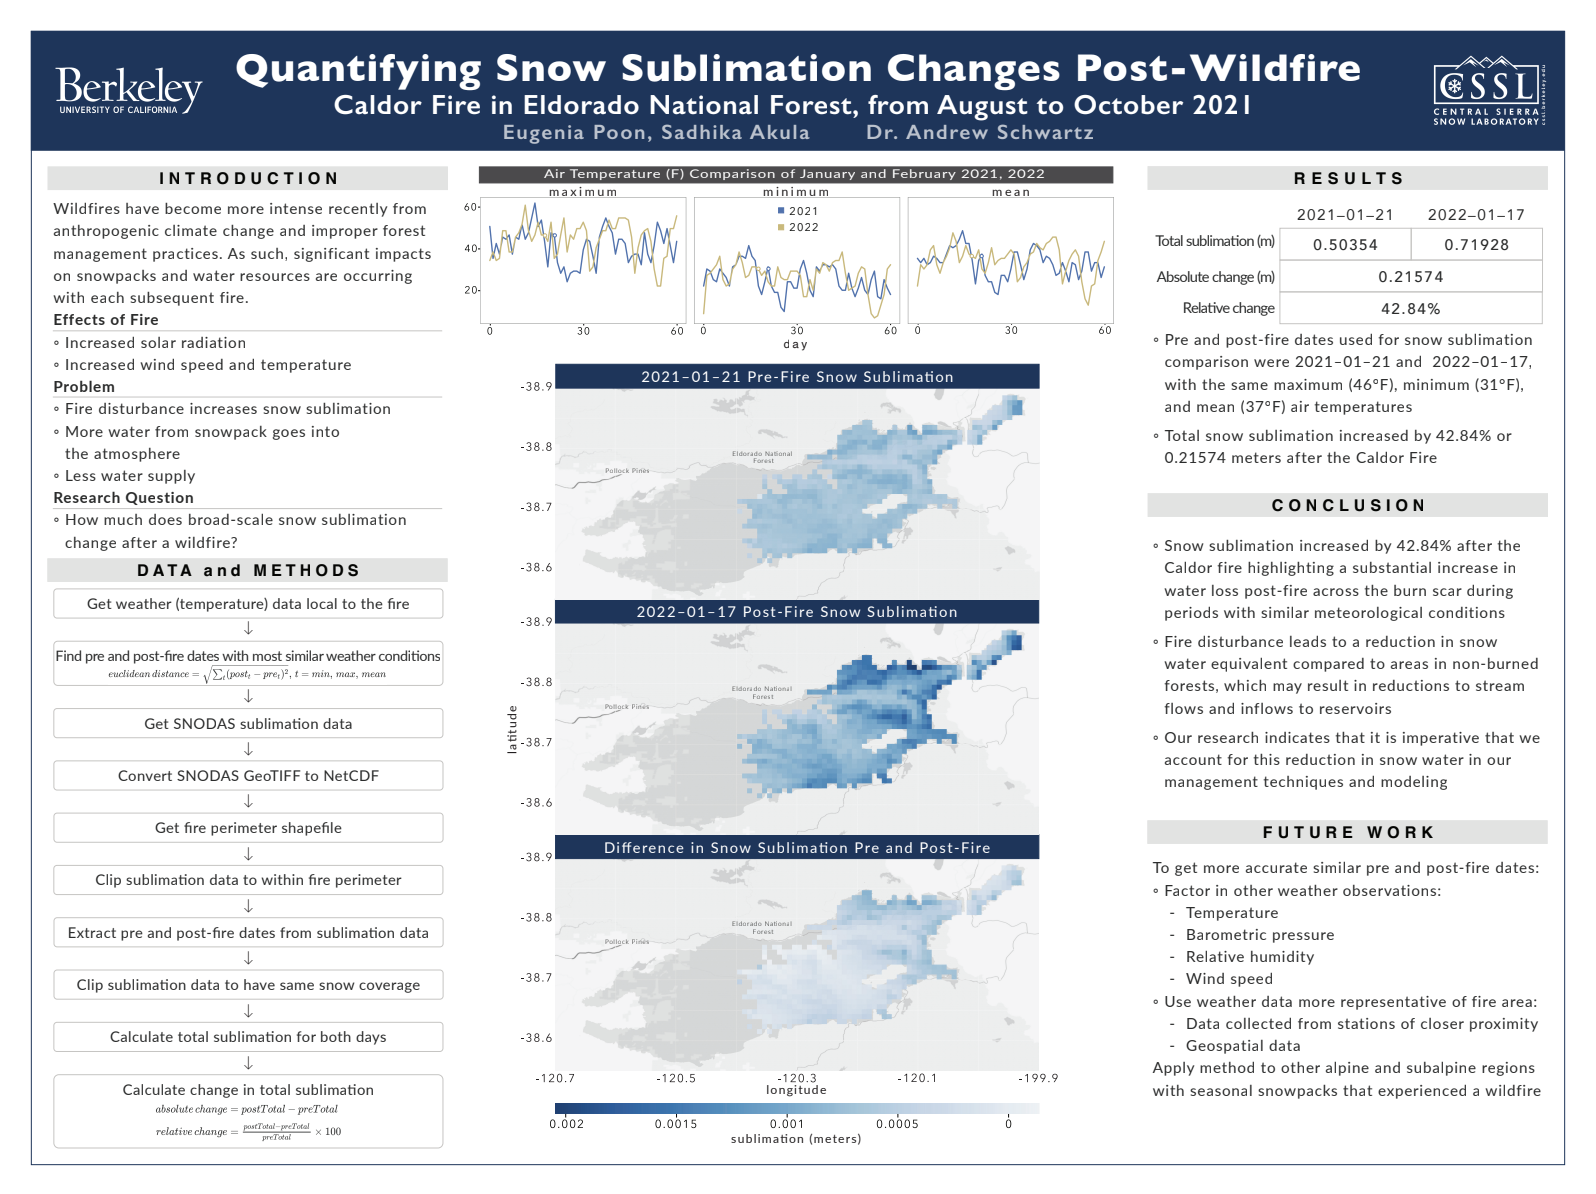 Quantifying surface evaporation changes post-wildfire - Fall 2022 Discovery Project